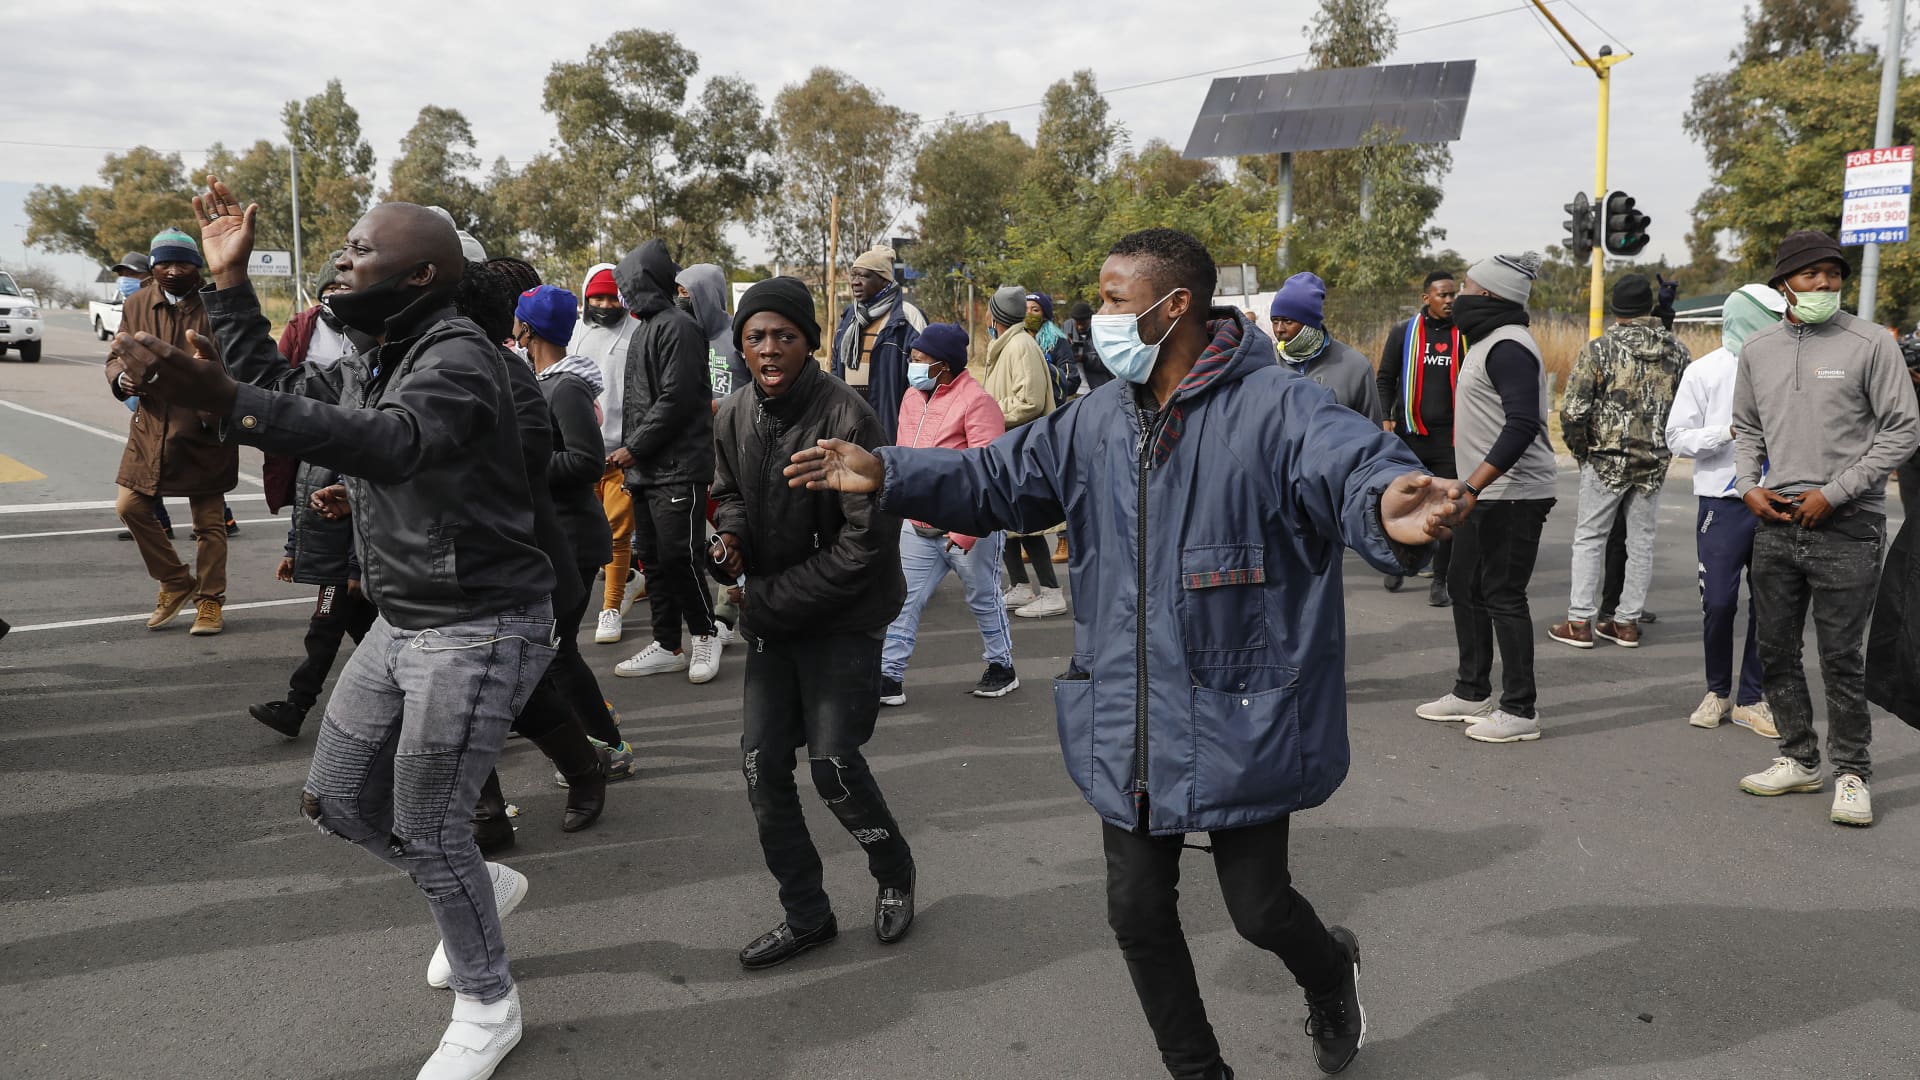 JOHANNESBURG, South Africa: Soweto residents picket near the entrance to state entity Eskom Offices at Megawatt Park in Midrand, near Johannesburg, on June 9, 2021 due to the ongoing electricity disruptions. Eskom, on June 9, 2021 announced it will implement nationwide power cuts due to rising consumption as the cold weather sets in and breakdowns at two power plants.